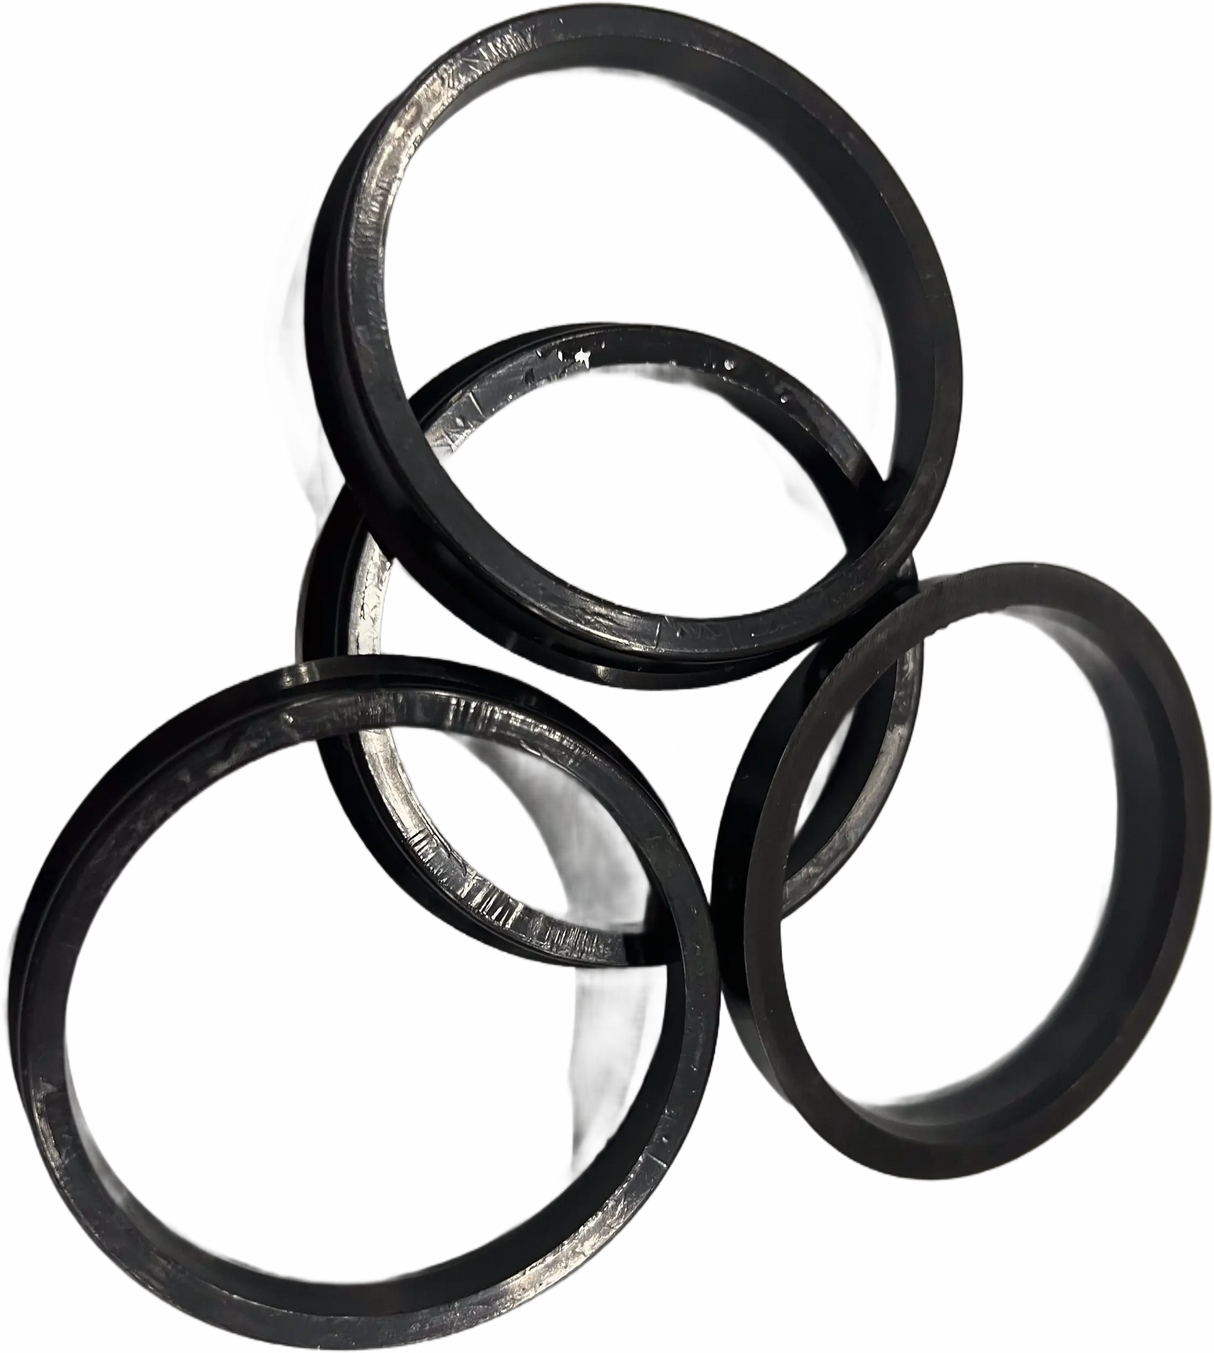 4x centering ring 72.1 - 65.1 without edge